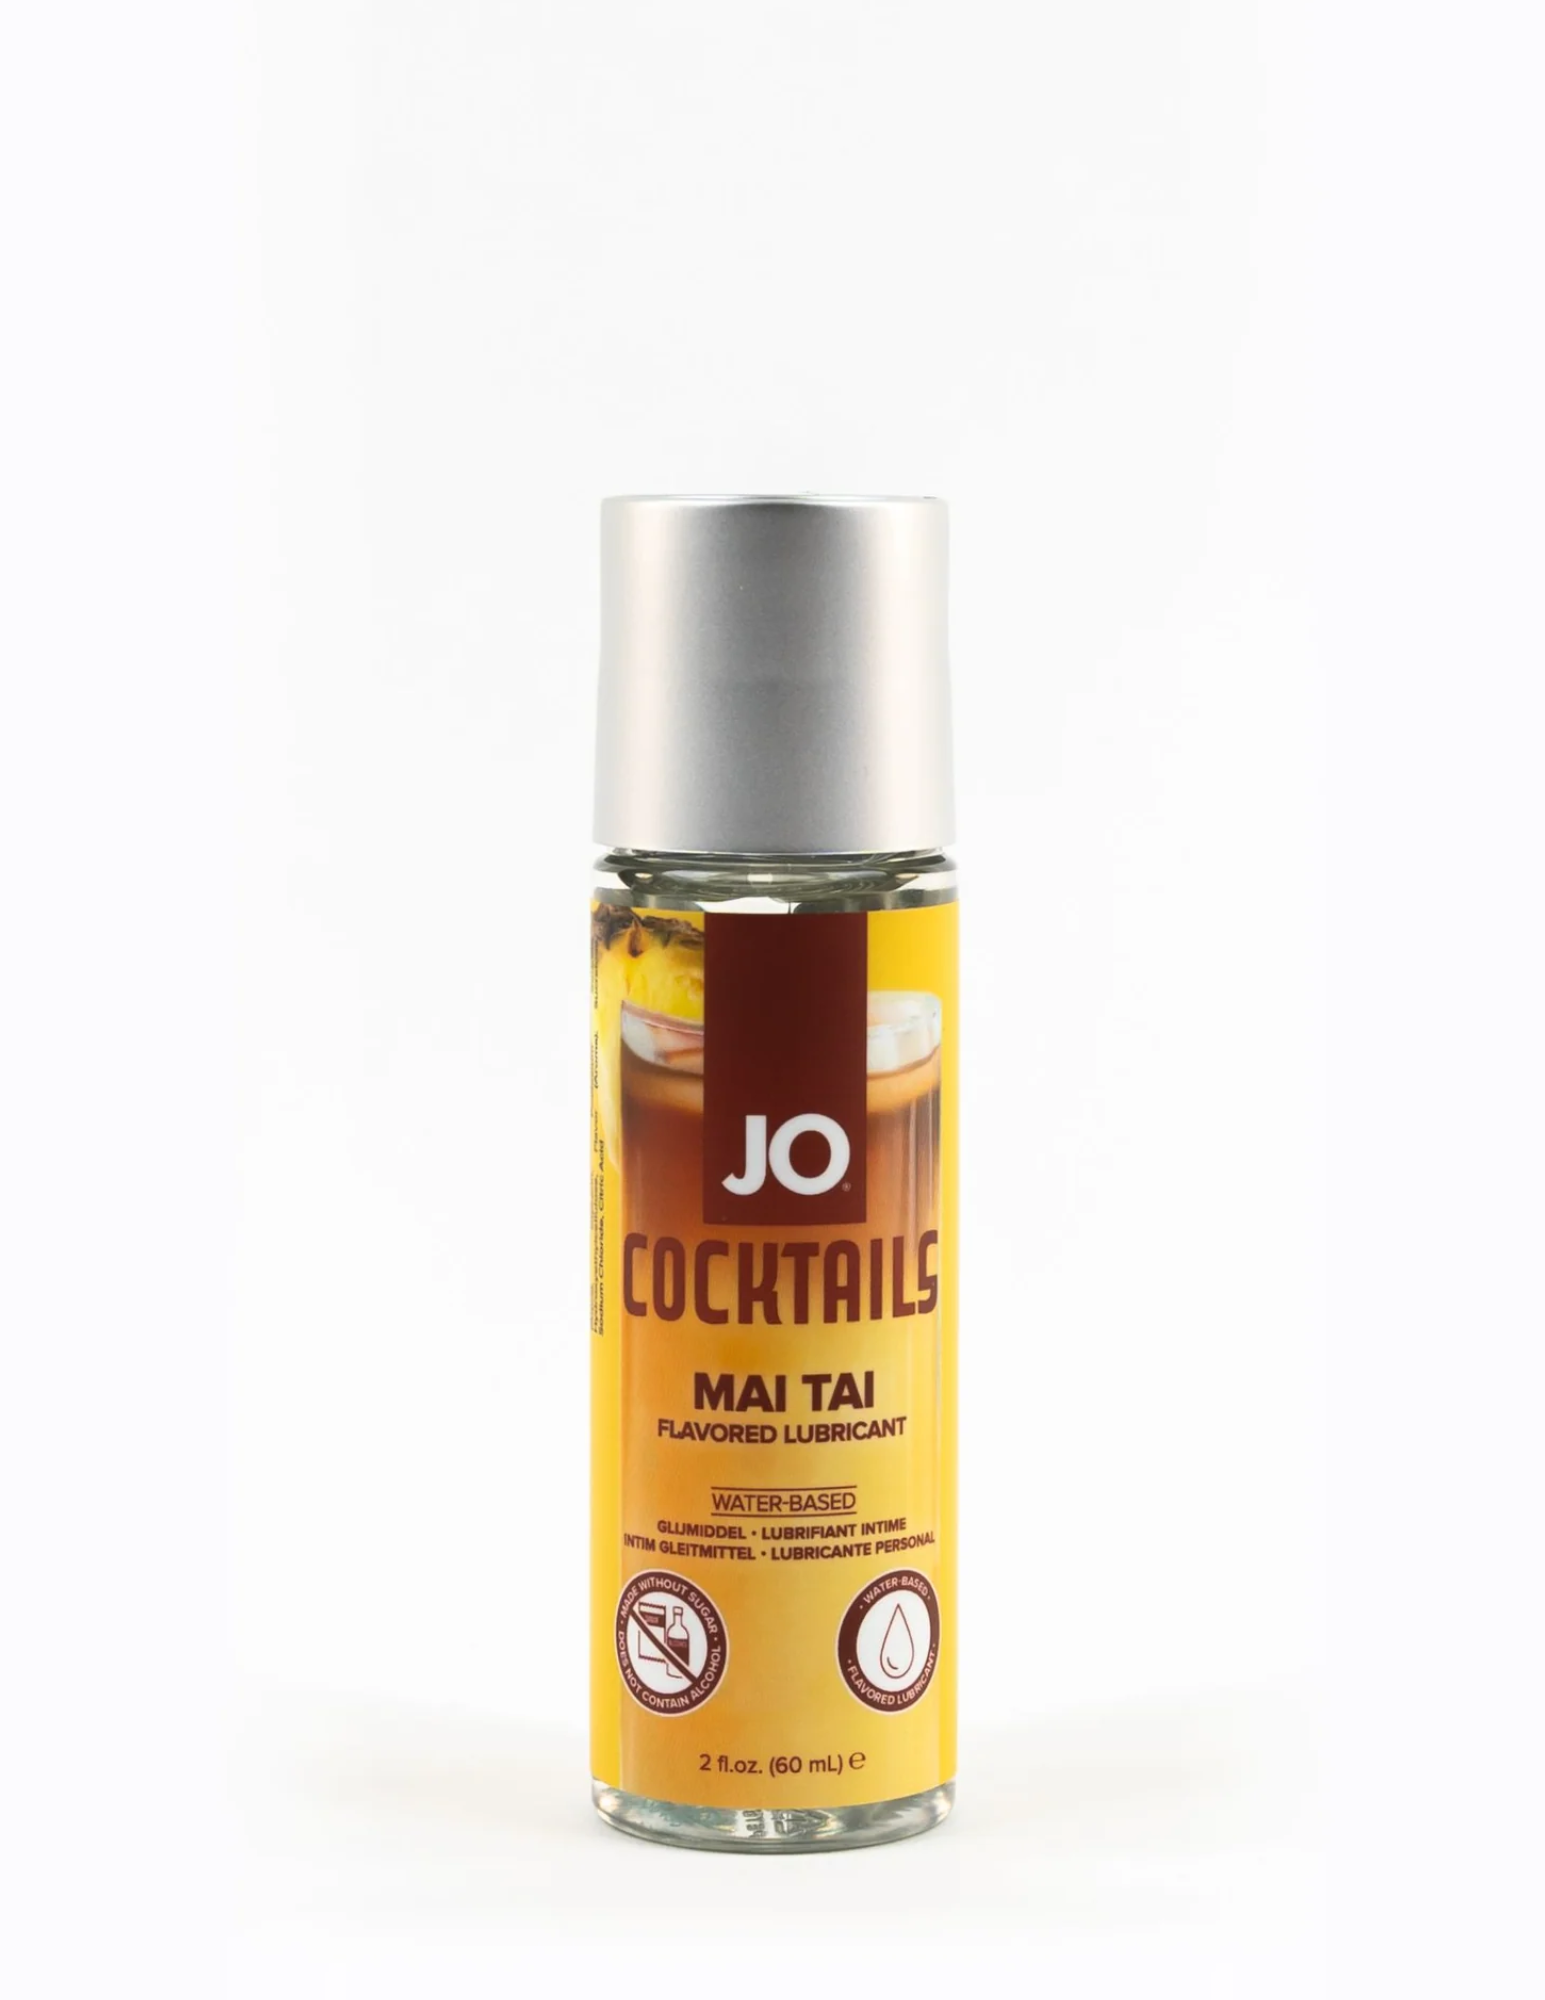 Photo of the 2oz Mai Tai bottle of System JO Cocktails Flavored Lubricant. 